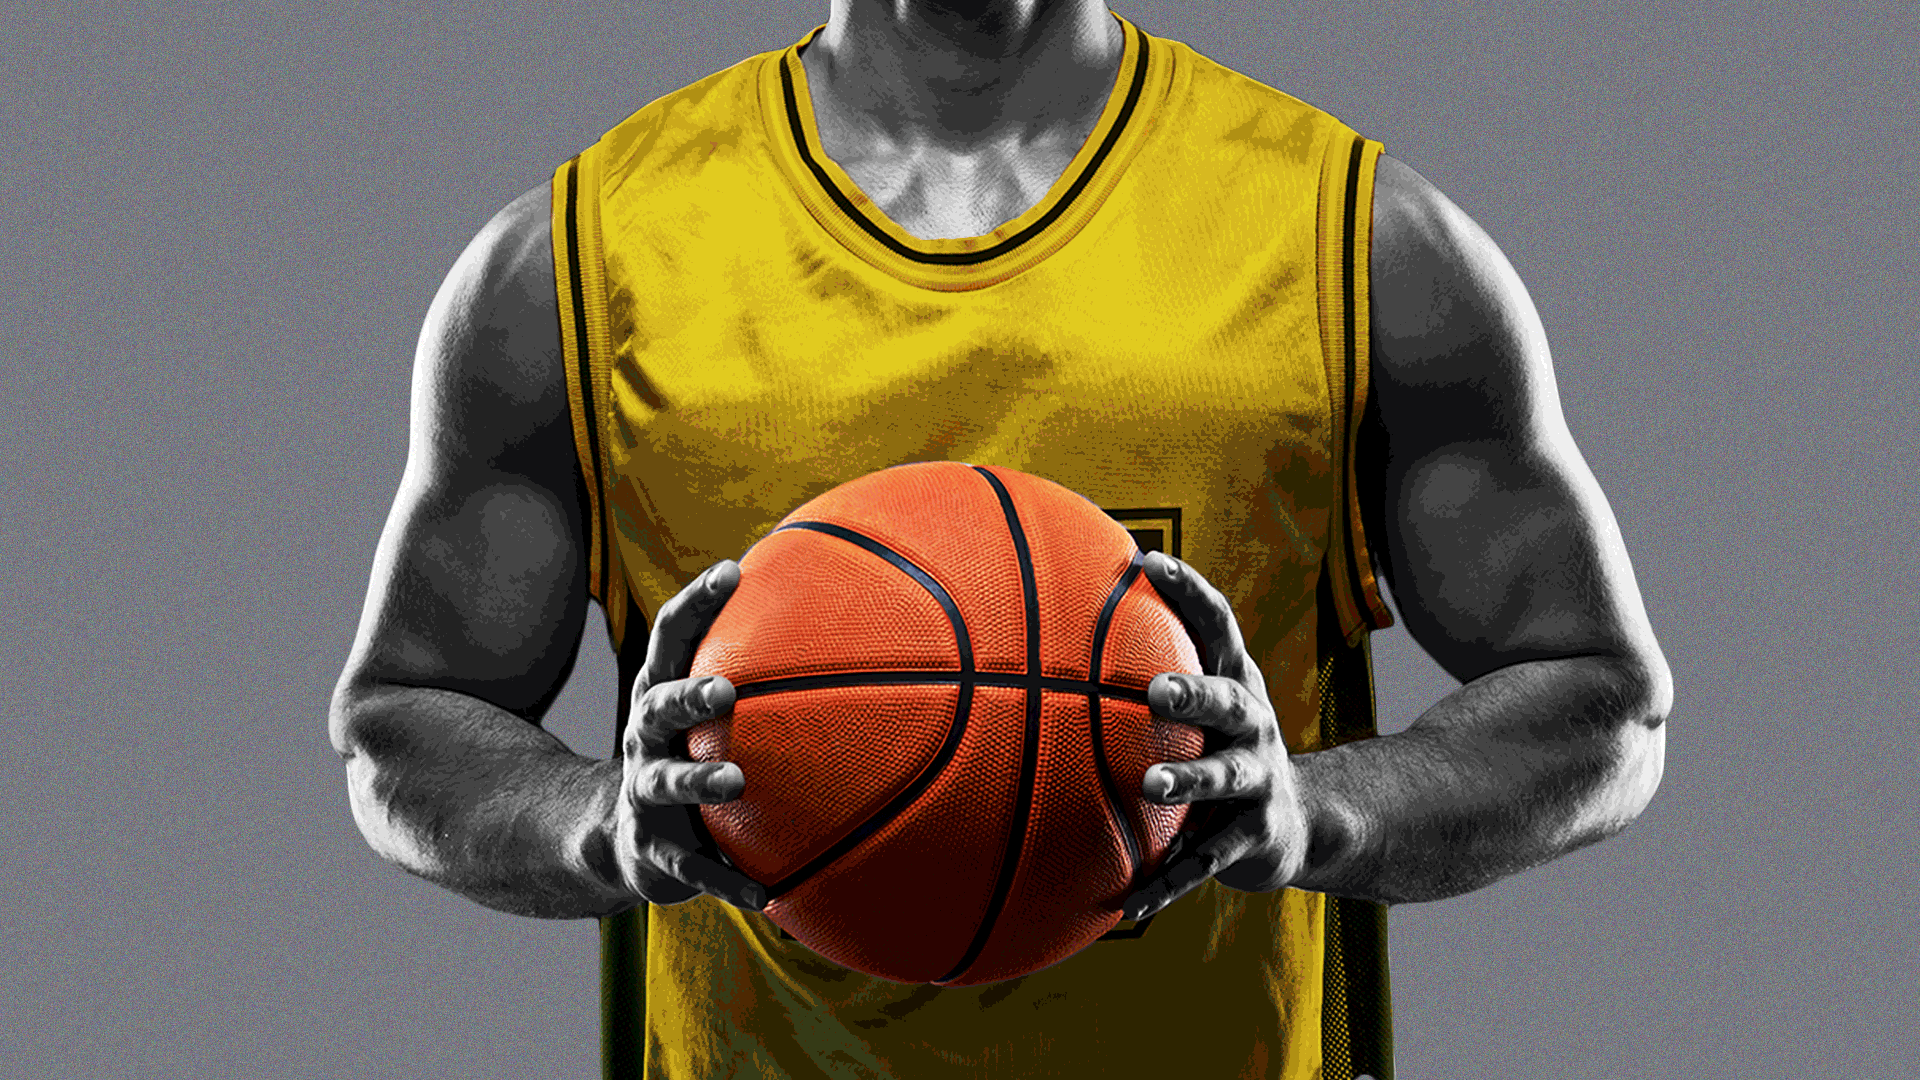 Animation of a basketball player wearing differently colored jerseys